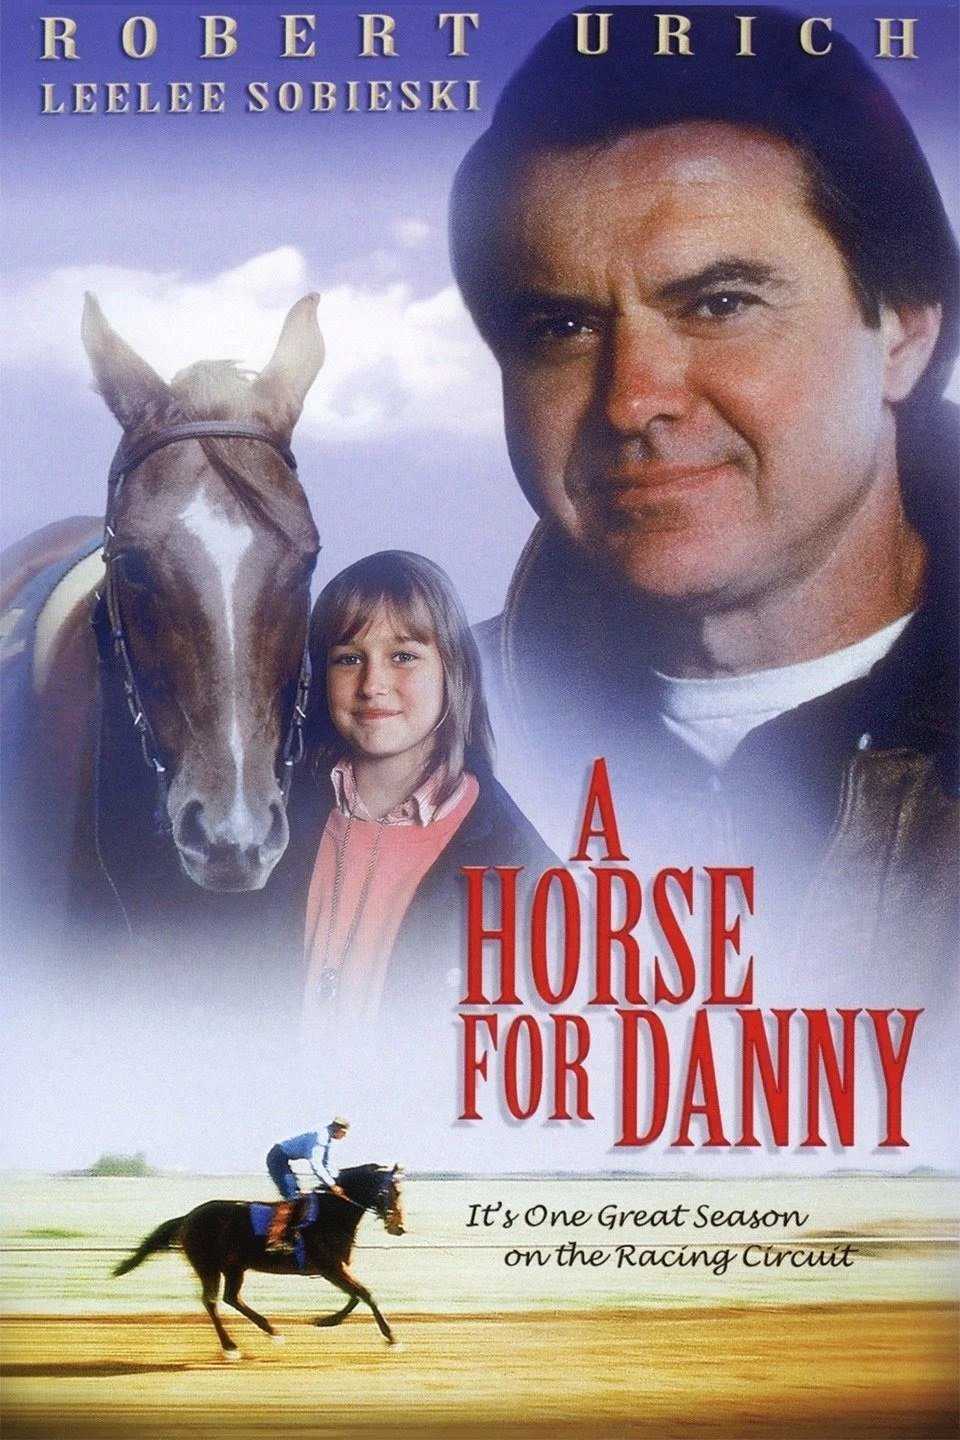 Poster of the movie A Horse for Danny